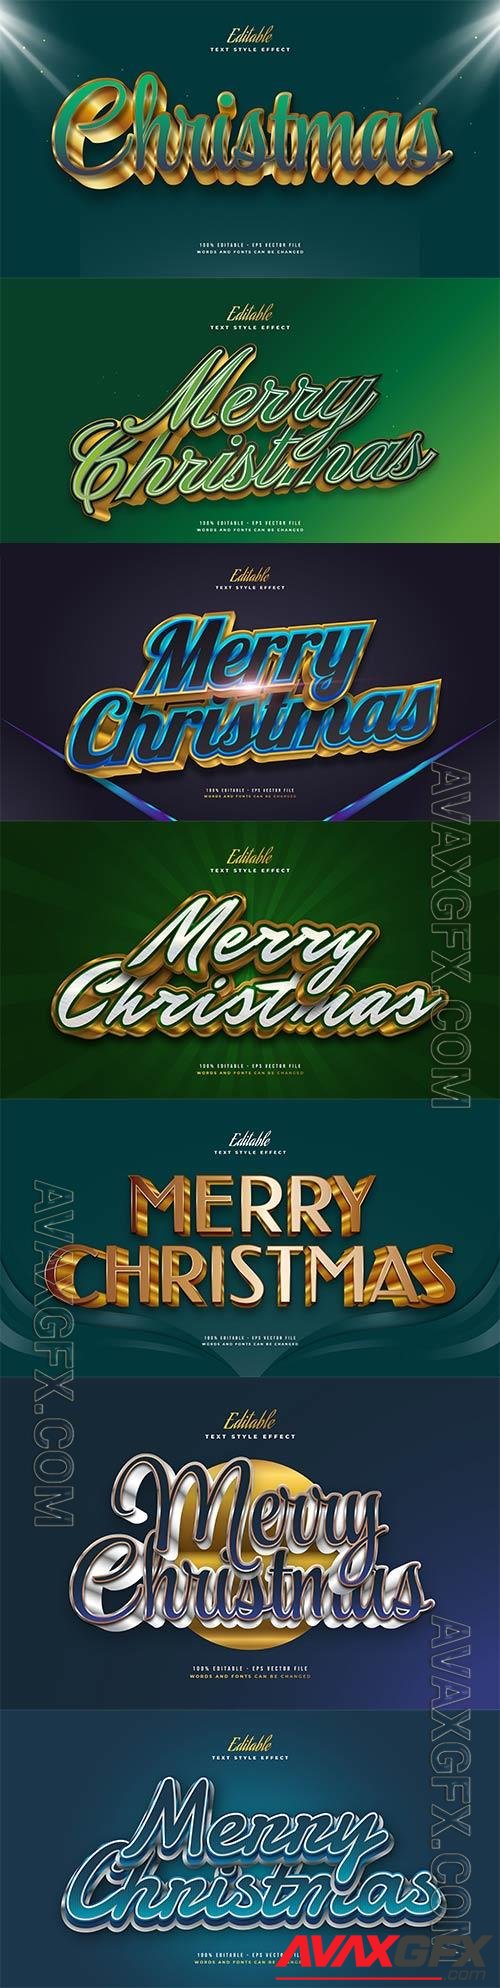 Merry christmas and happy new year 2022 editable vector text effects vol 23